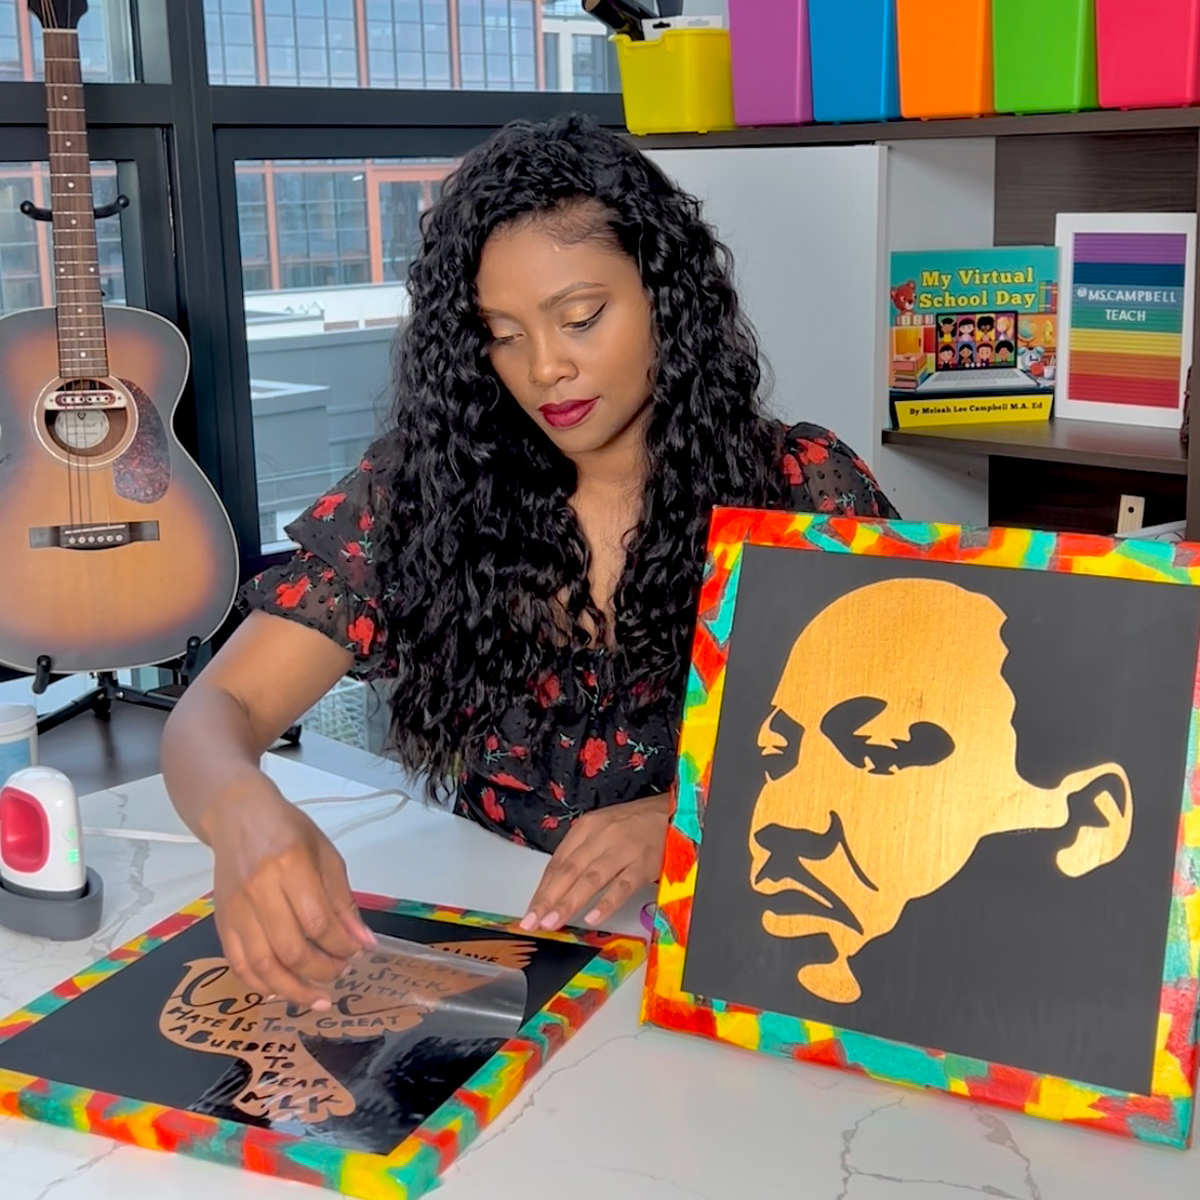 Celebrating Black History Month with DIY canvas art